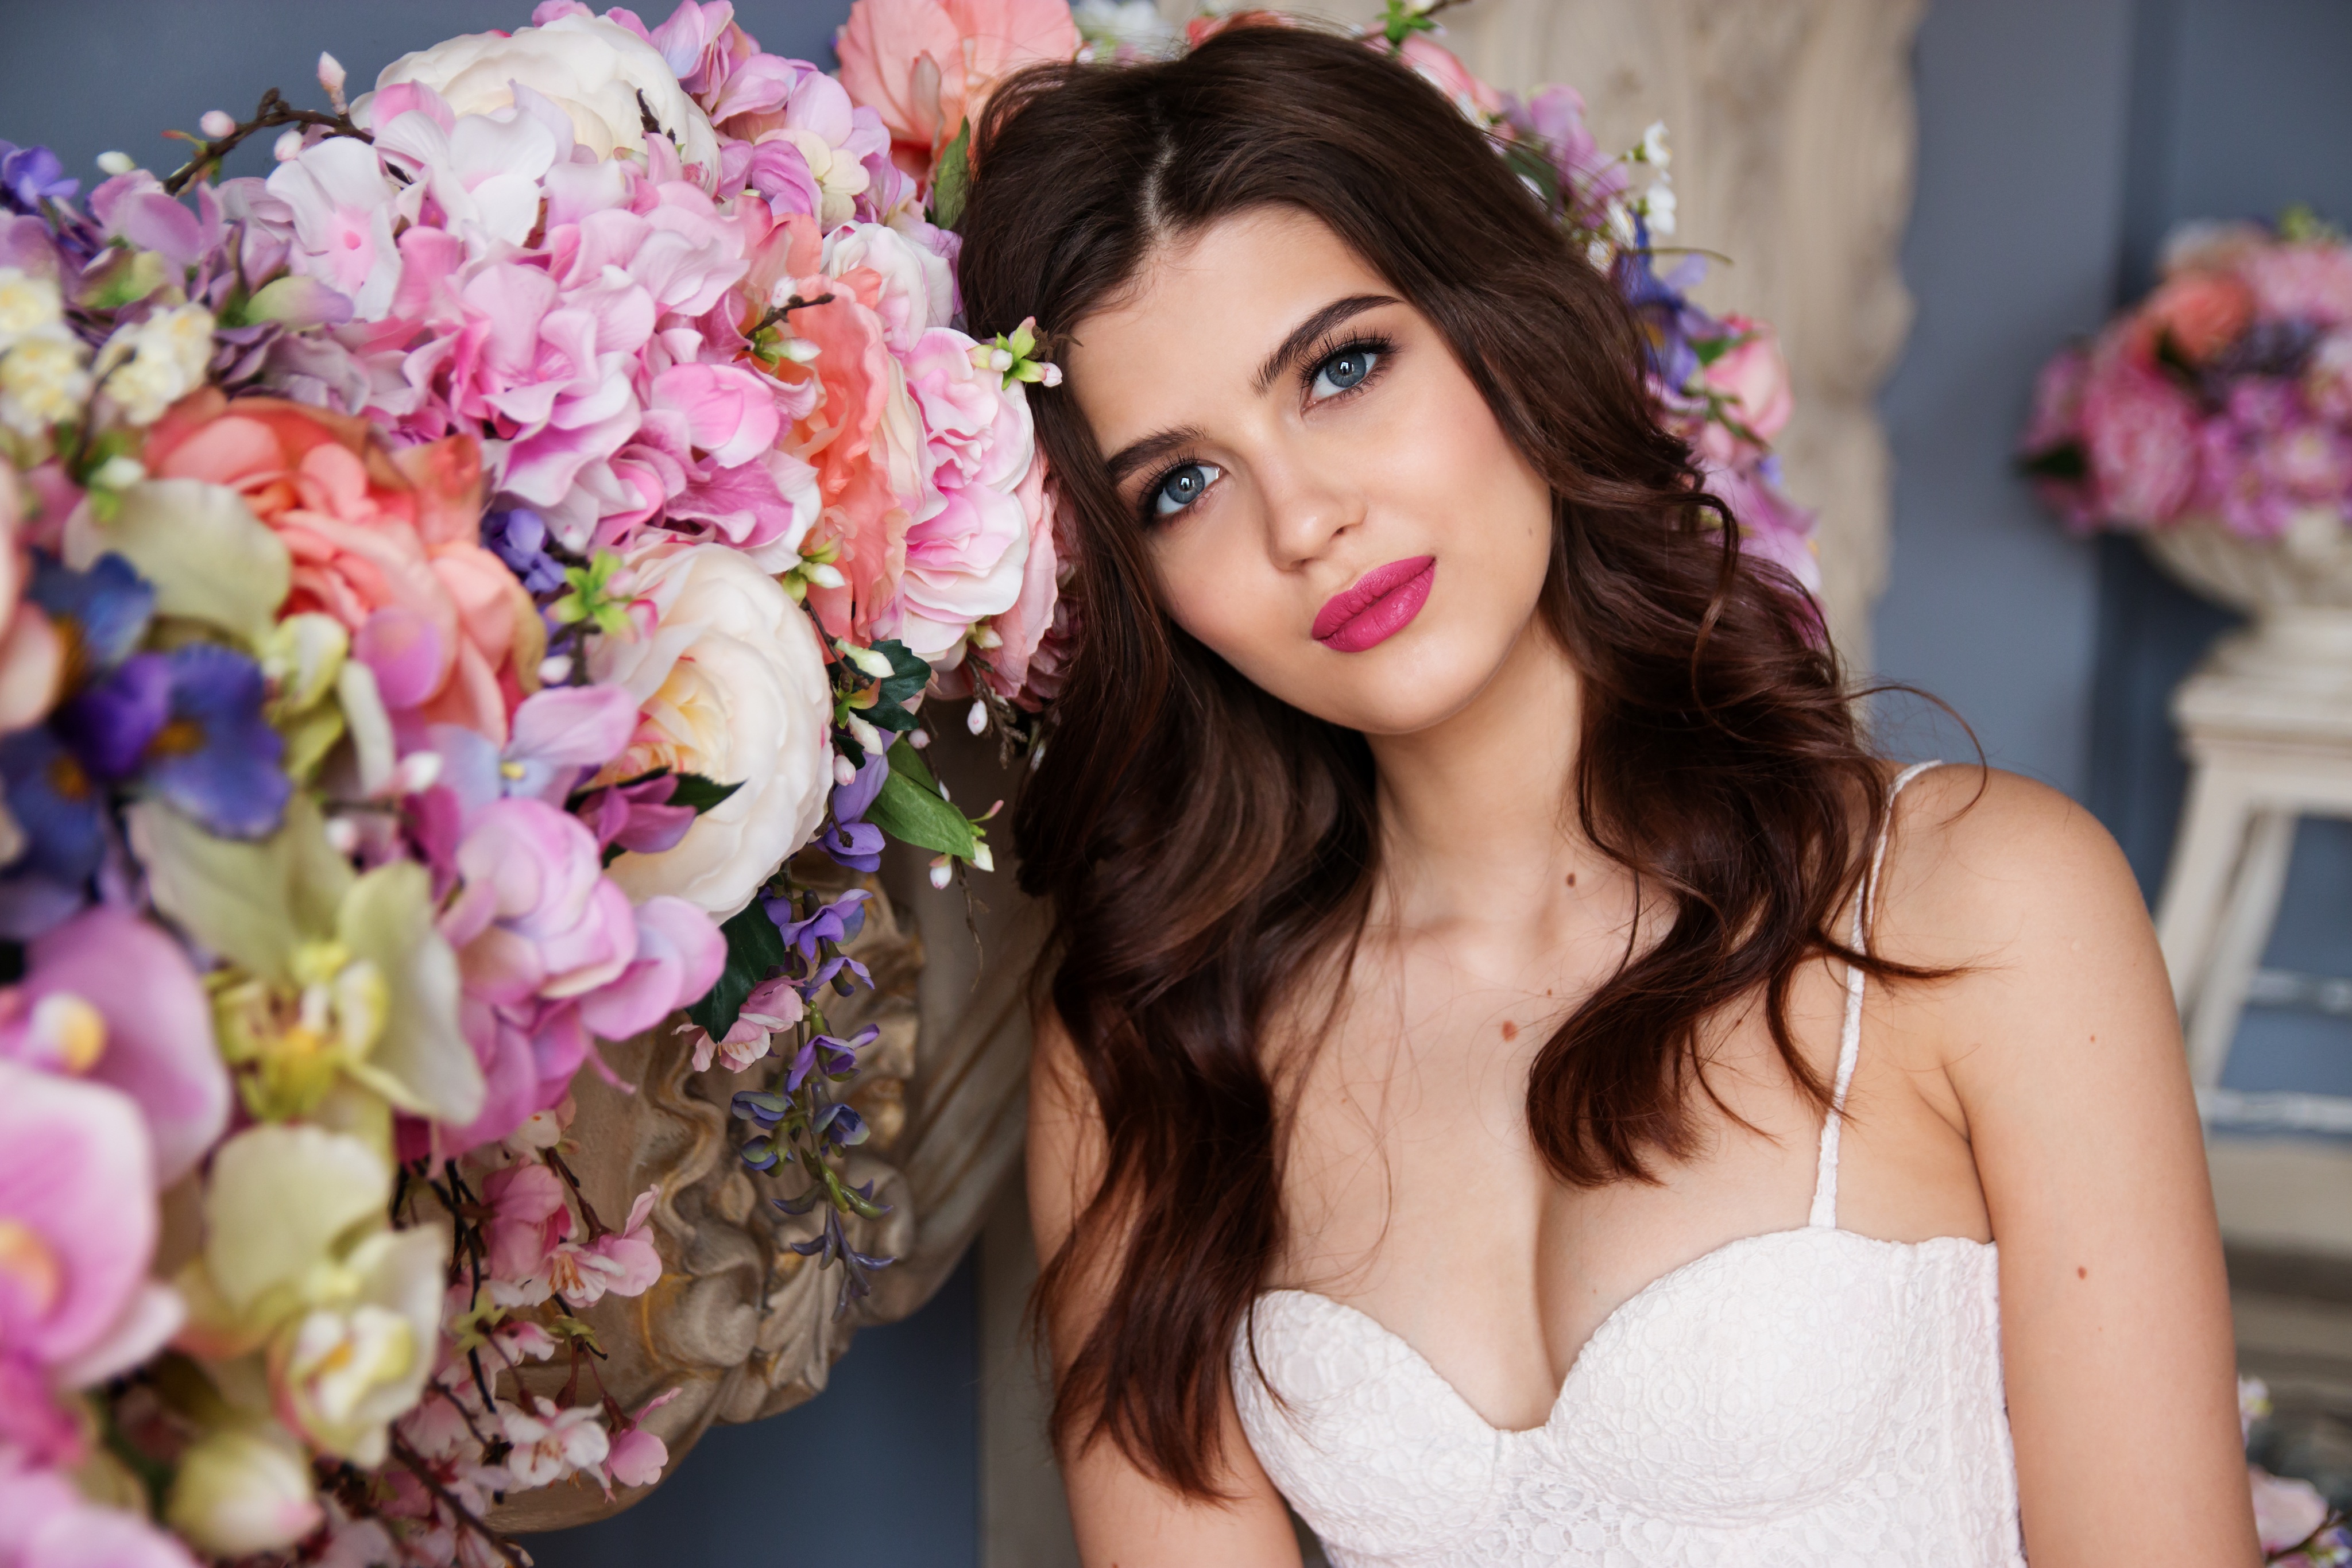 7 Tricks for Looking Extra Gorgeous for Your Destination Wedding